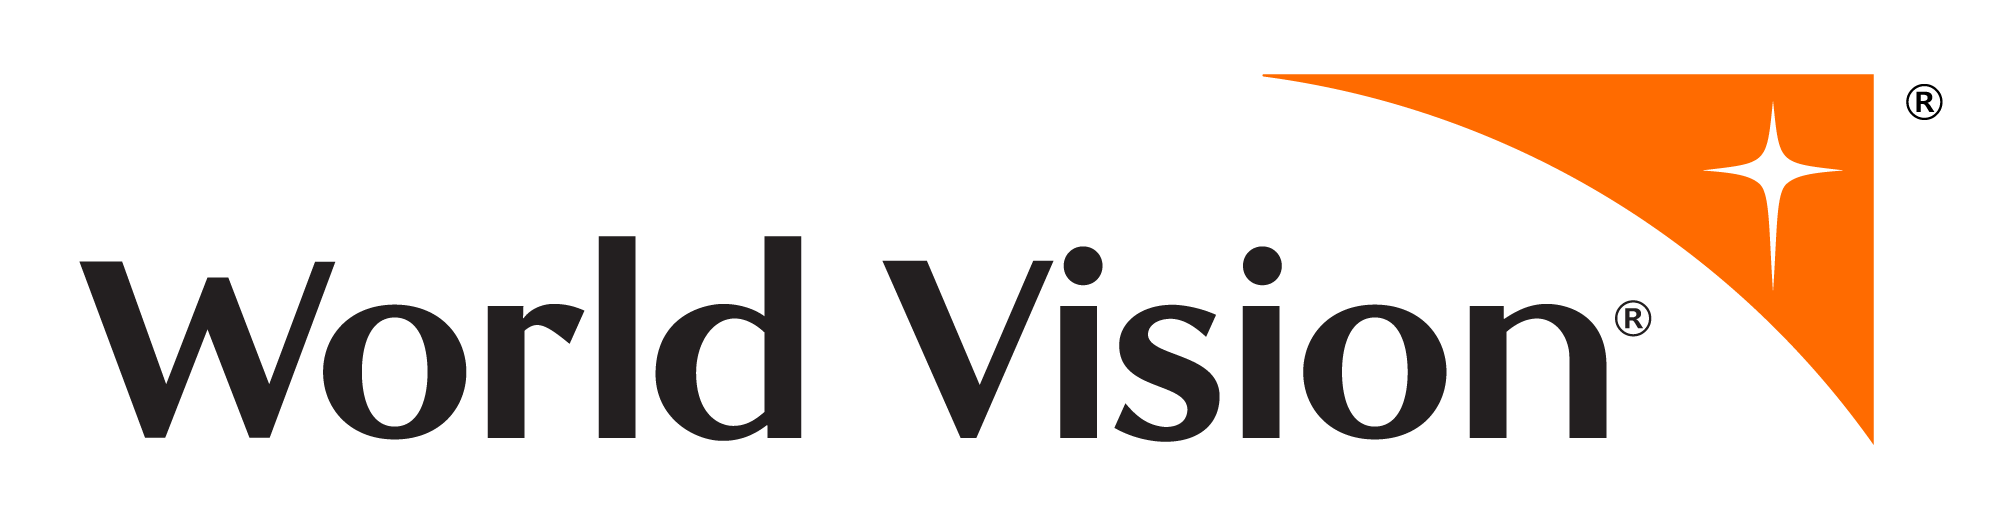 World Vision's logo: The text, World Vision framed by an orange beacon and white star